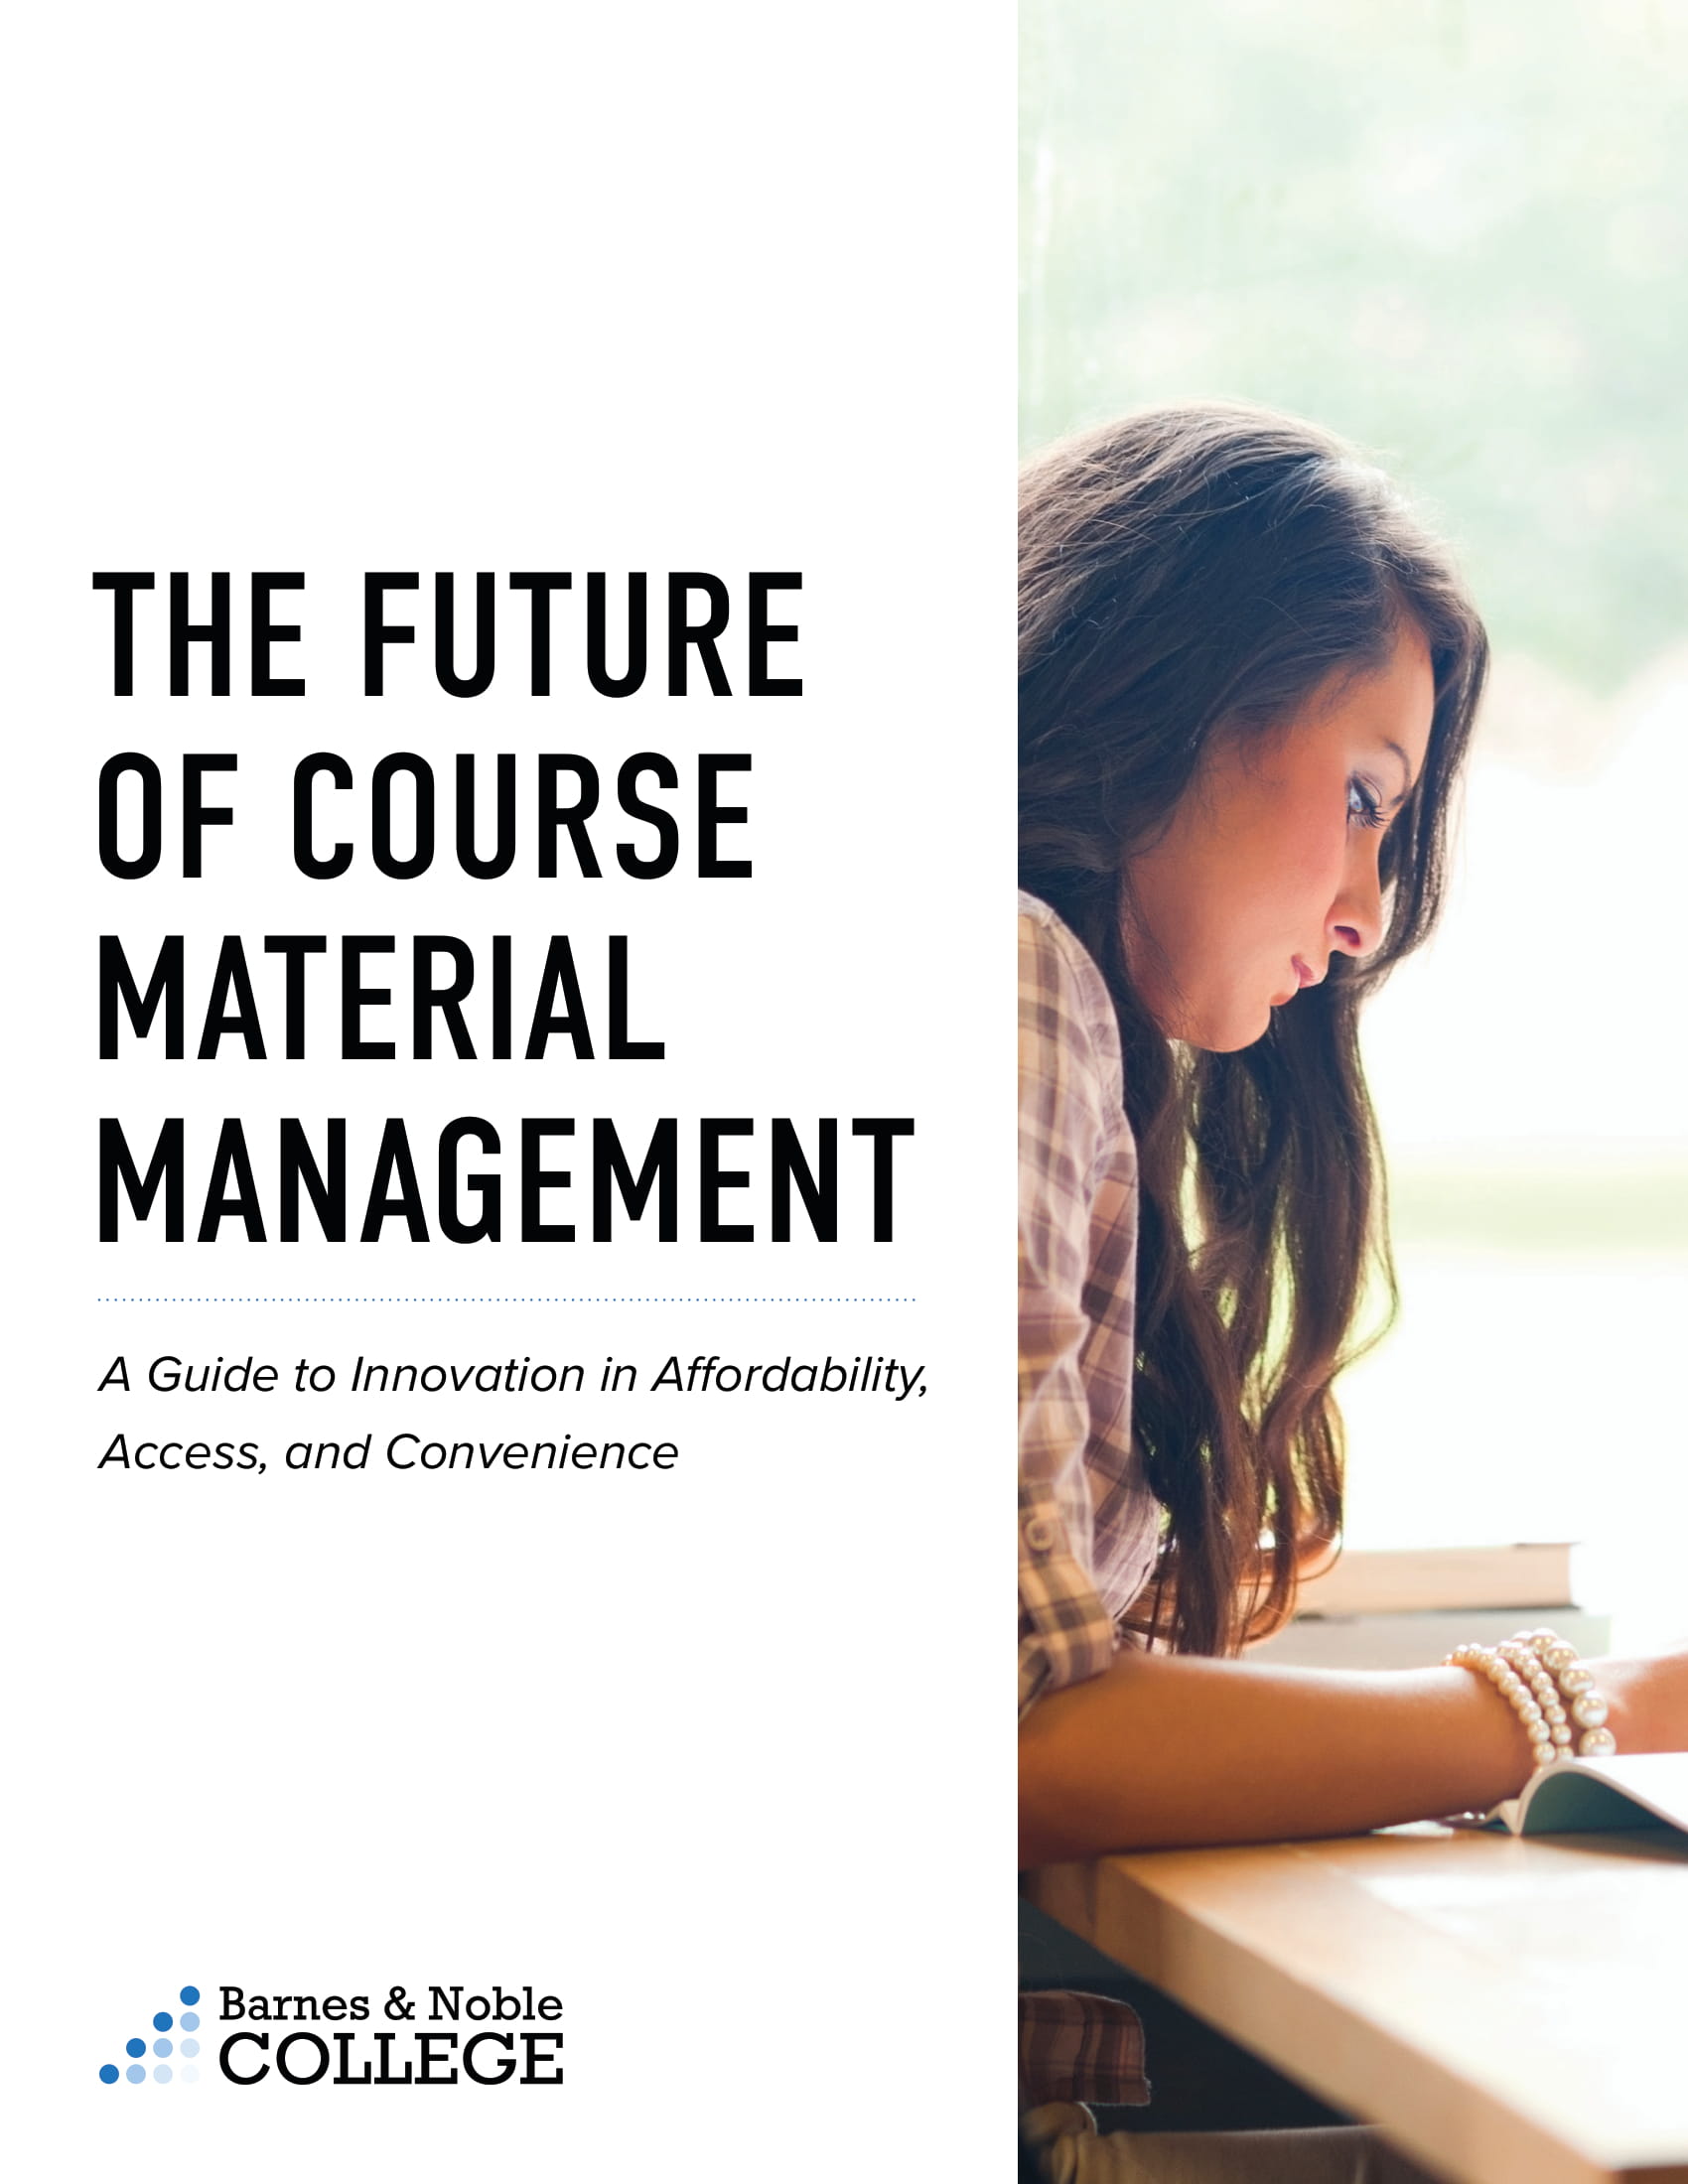 The Future of Course Material Management